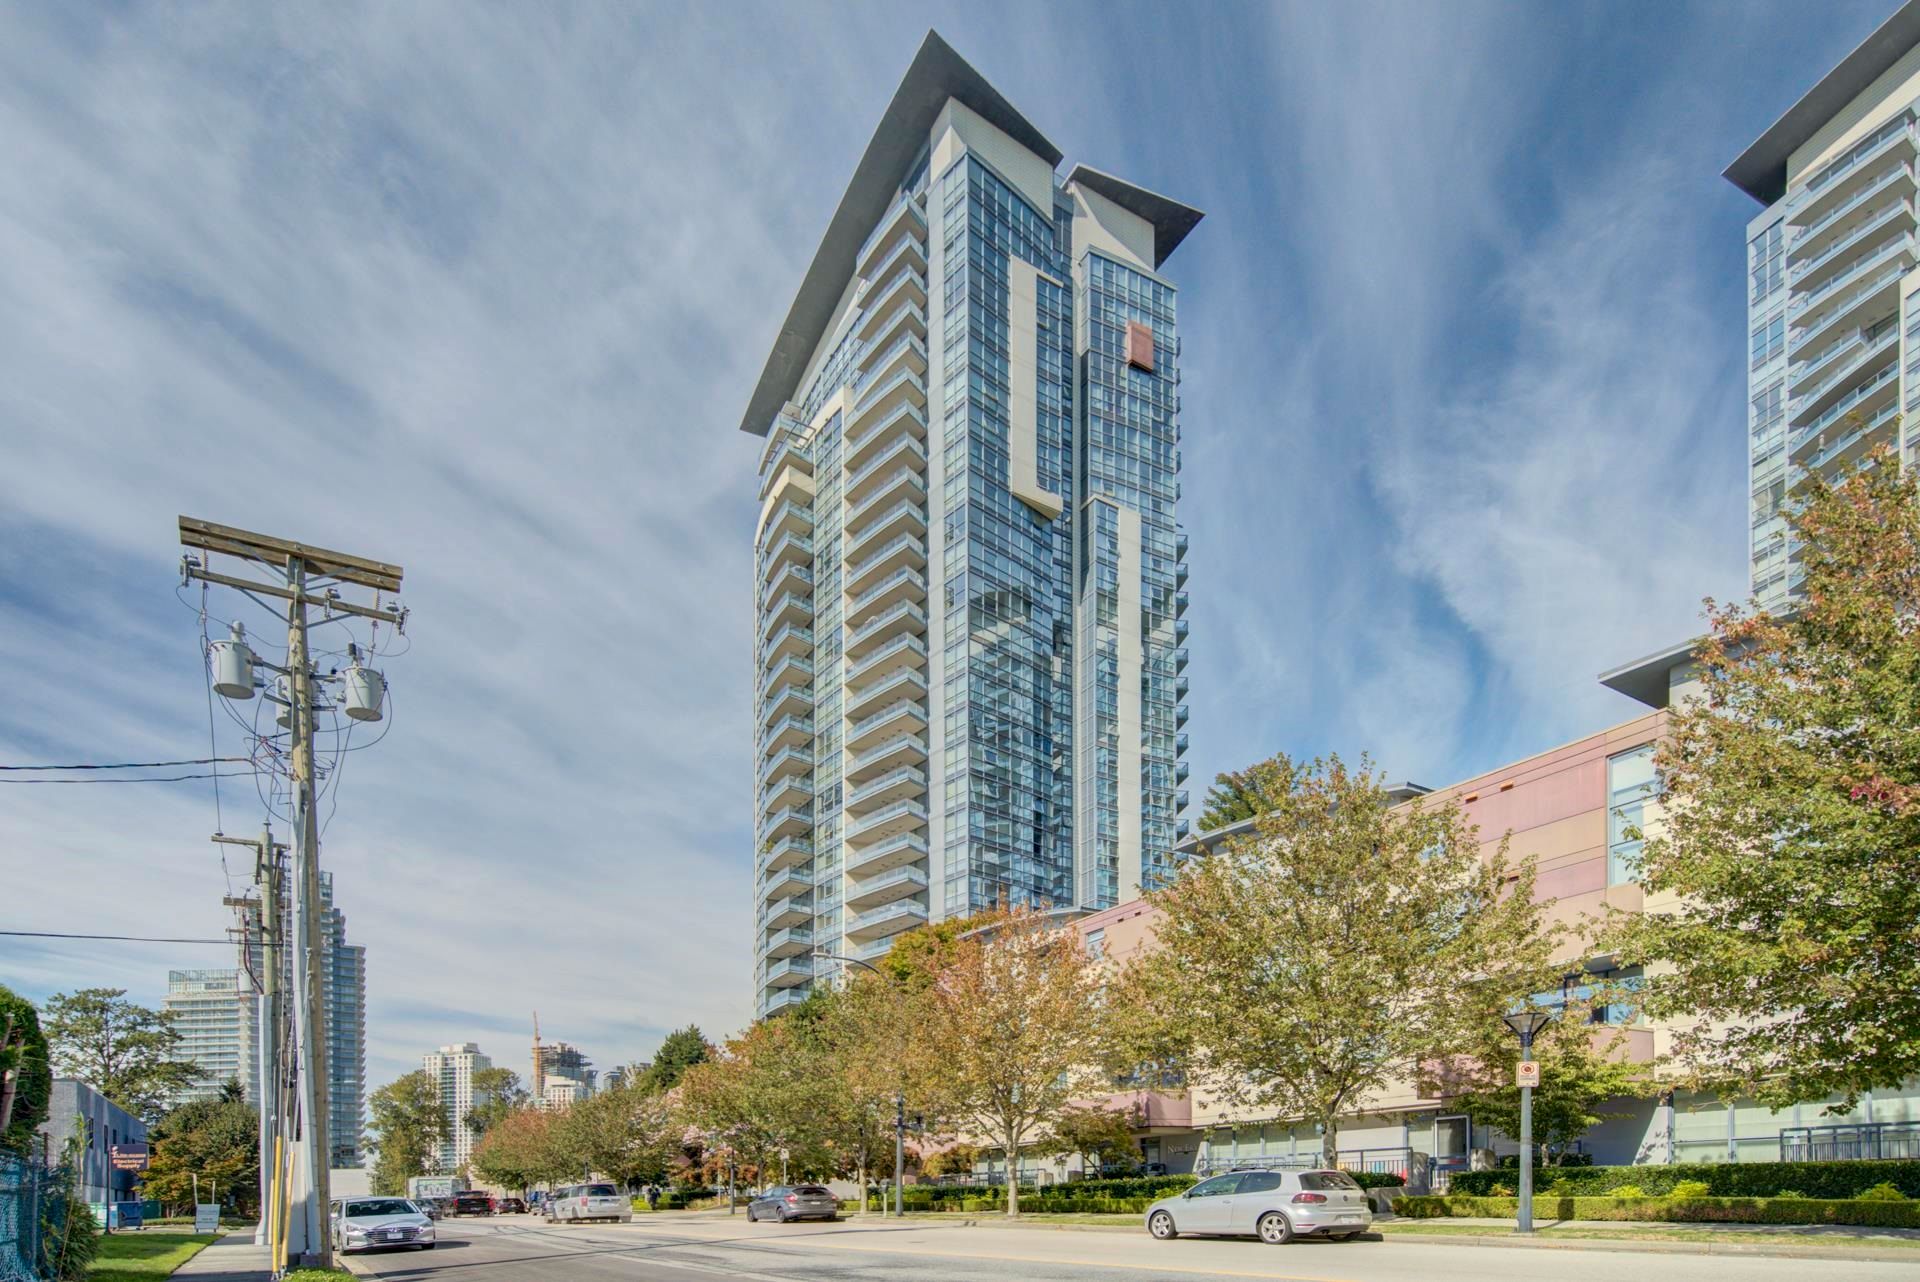 Main Photo: 1206 5611 GORING STREET in Burnaby: Central BN Condo for sale (Burnaby North)  : MLS®# R2619138